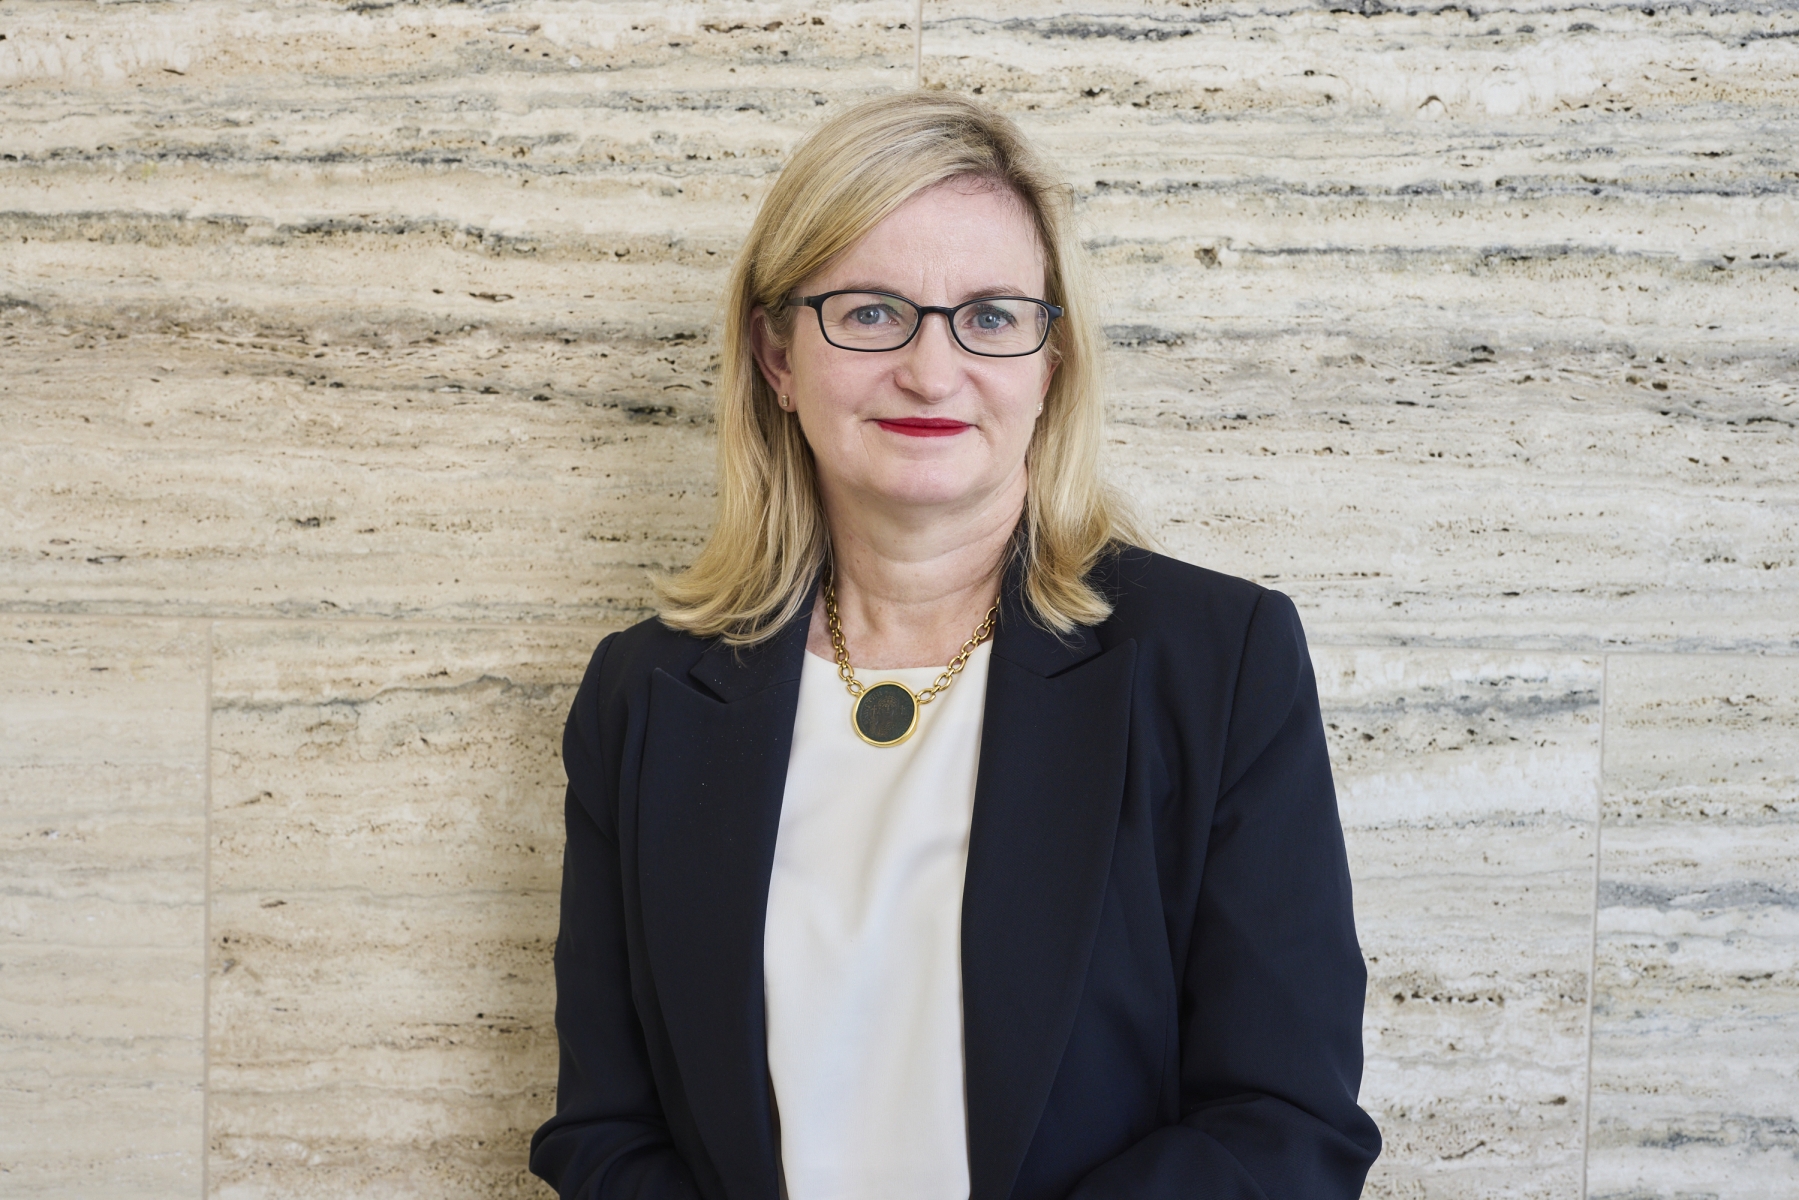 Export Finance Australia's Chief Investment Officer, Amanda Copping